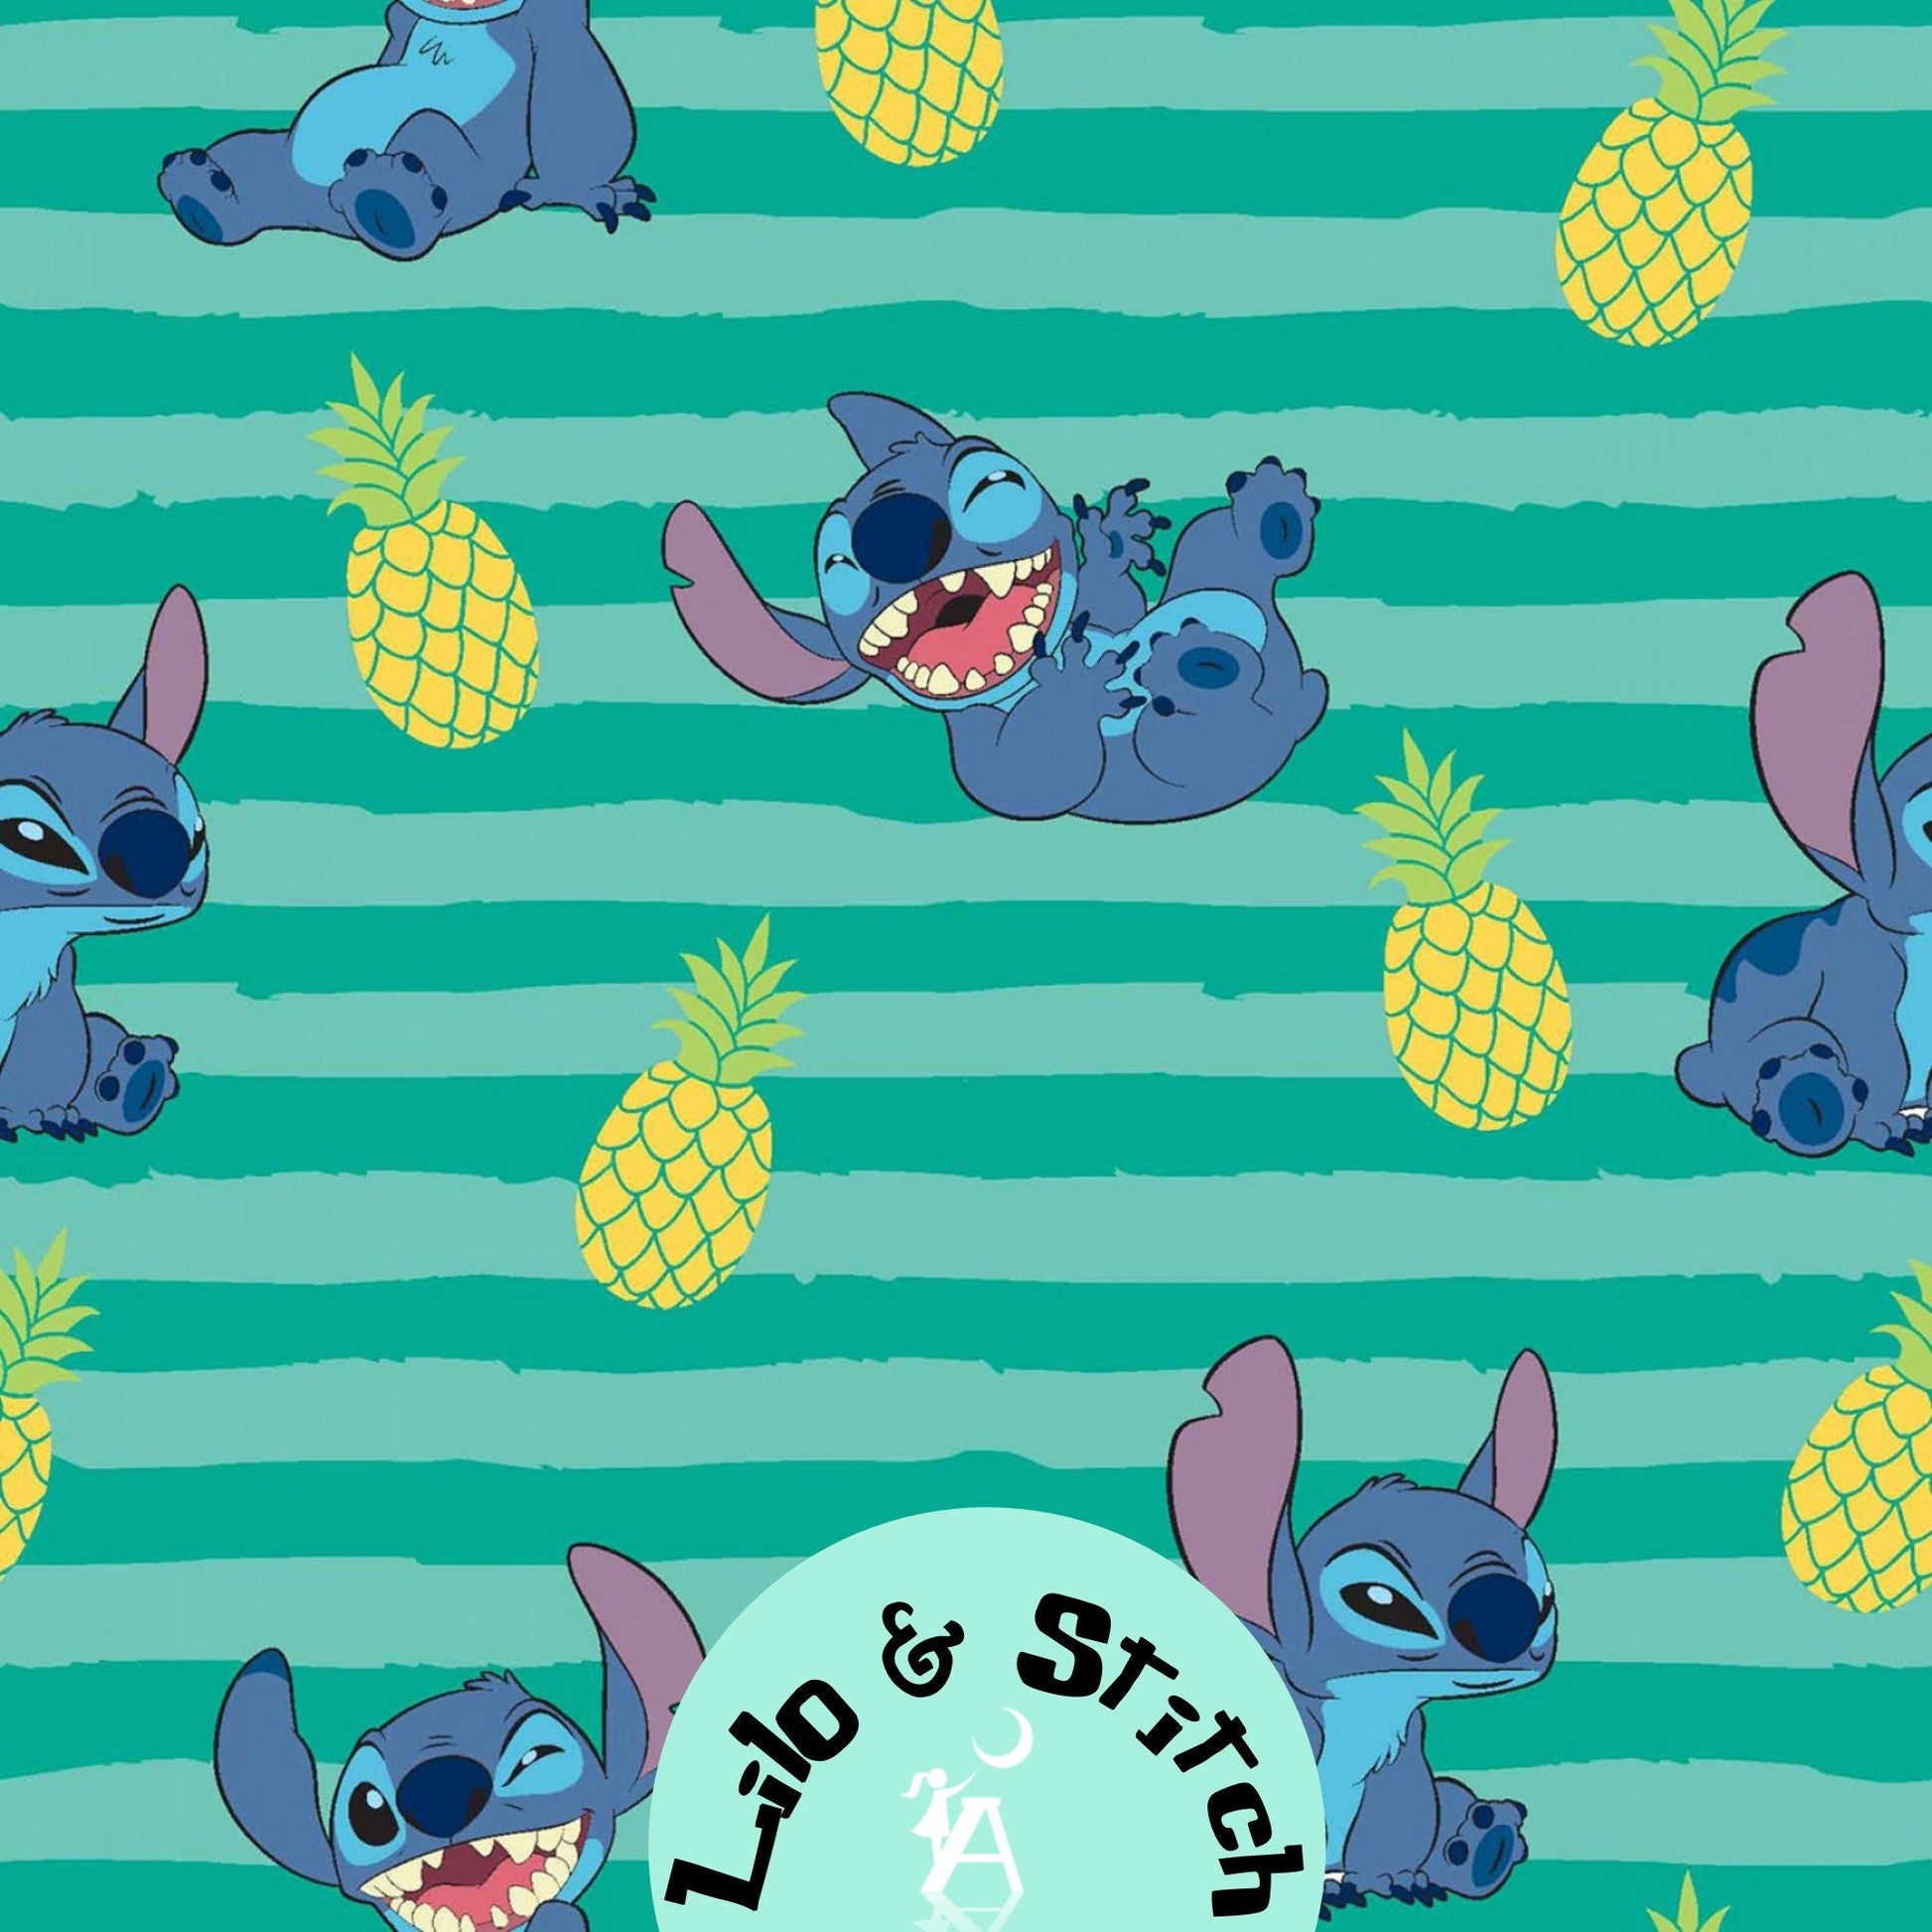 2 x STITCH AND ANGEL Wrapping Paper - Disney Stitch Gift Wrap - Disney Gift  Wrap - Disney Wrapping Paper - Stitch and Angel Gift Wrap